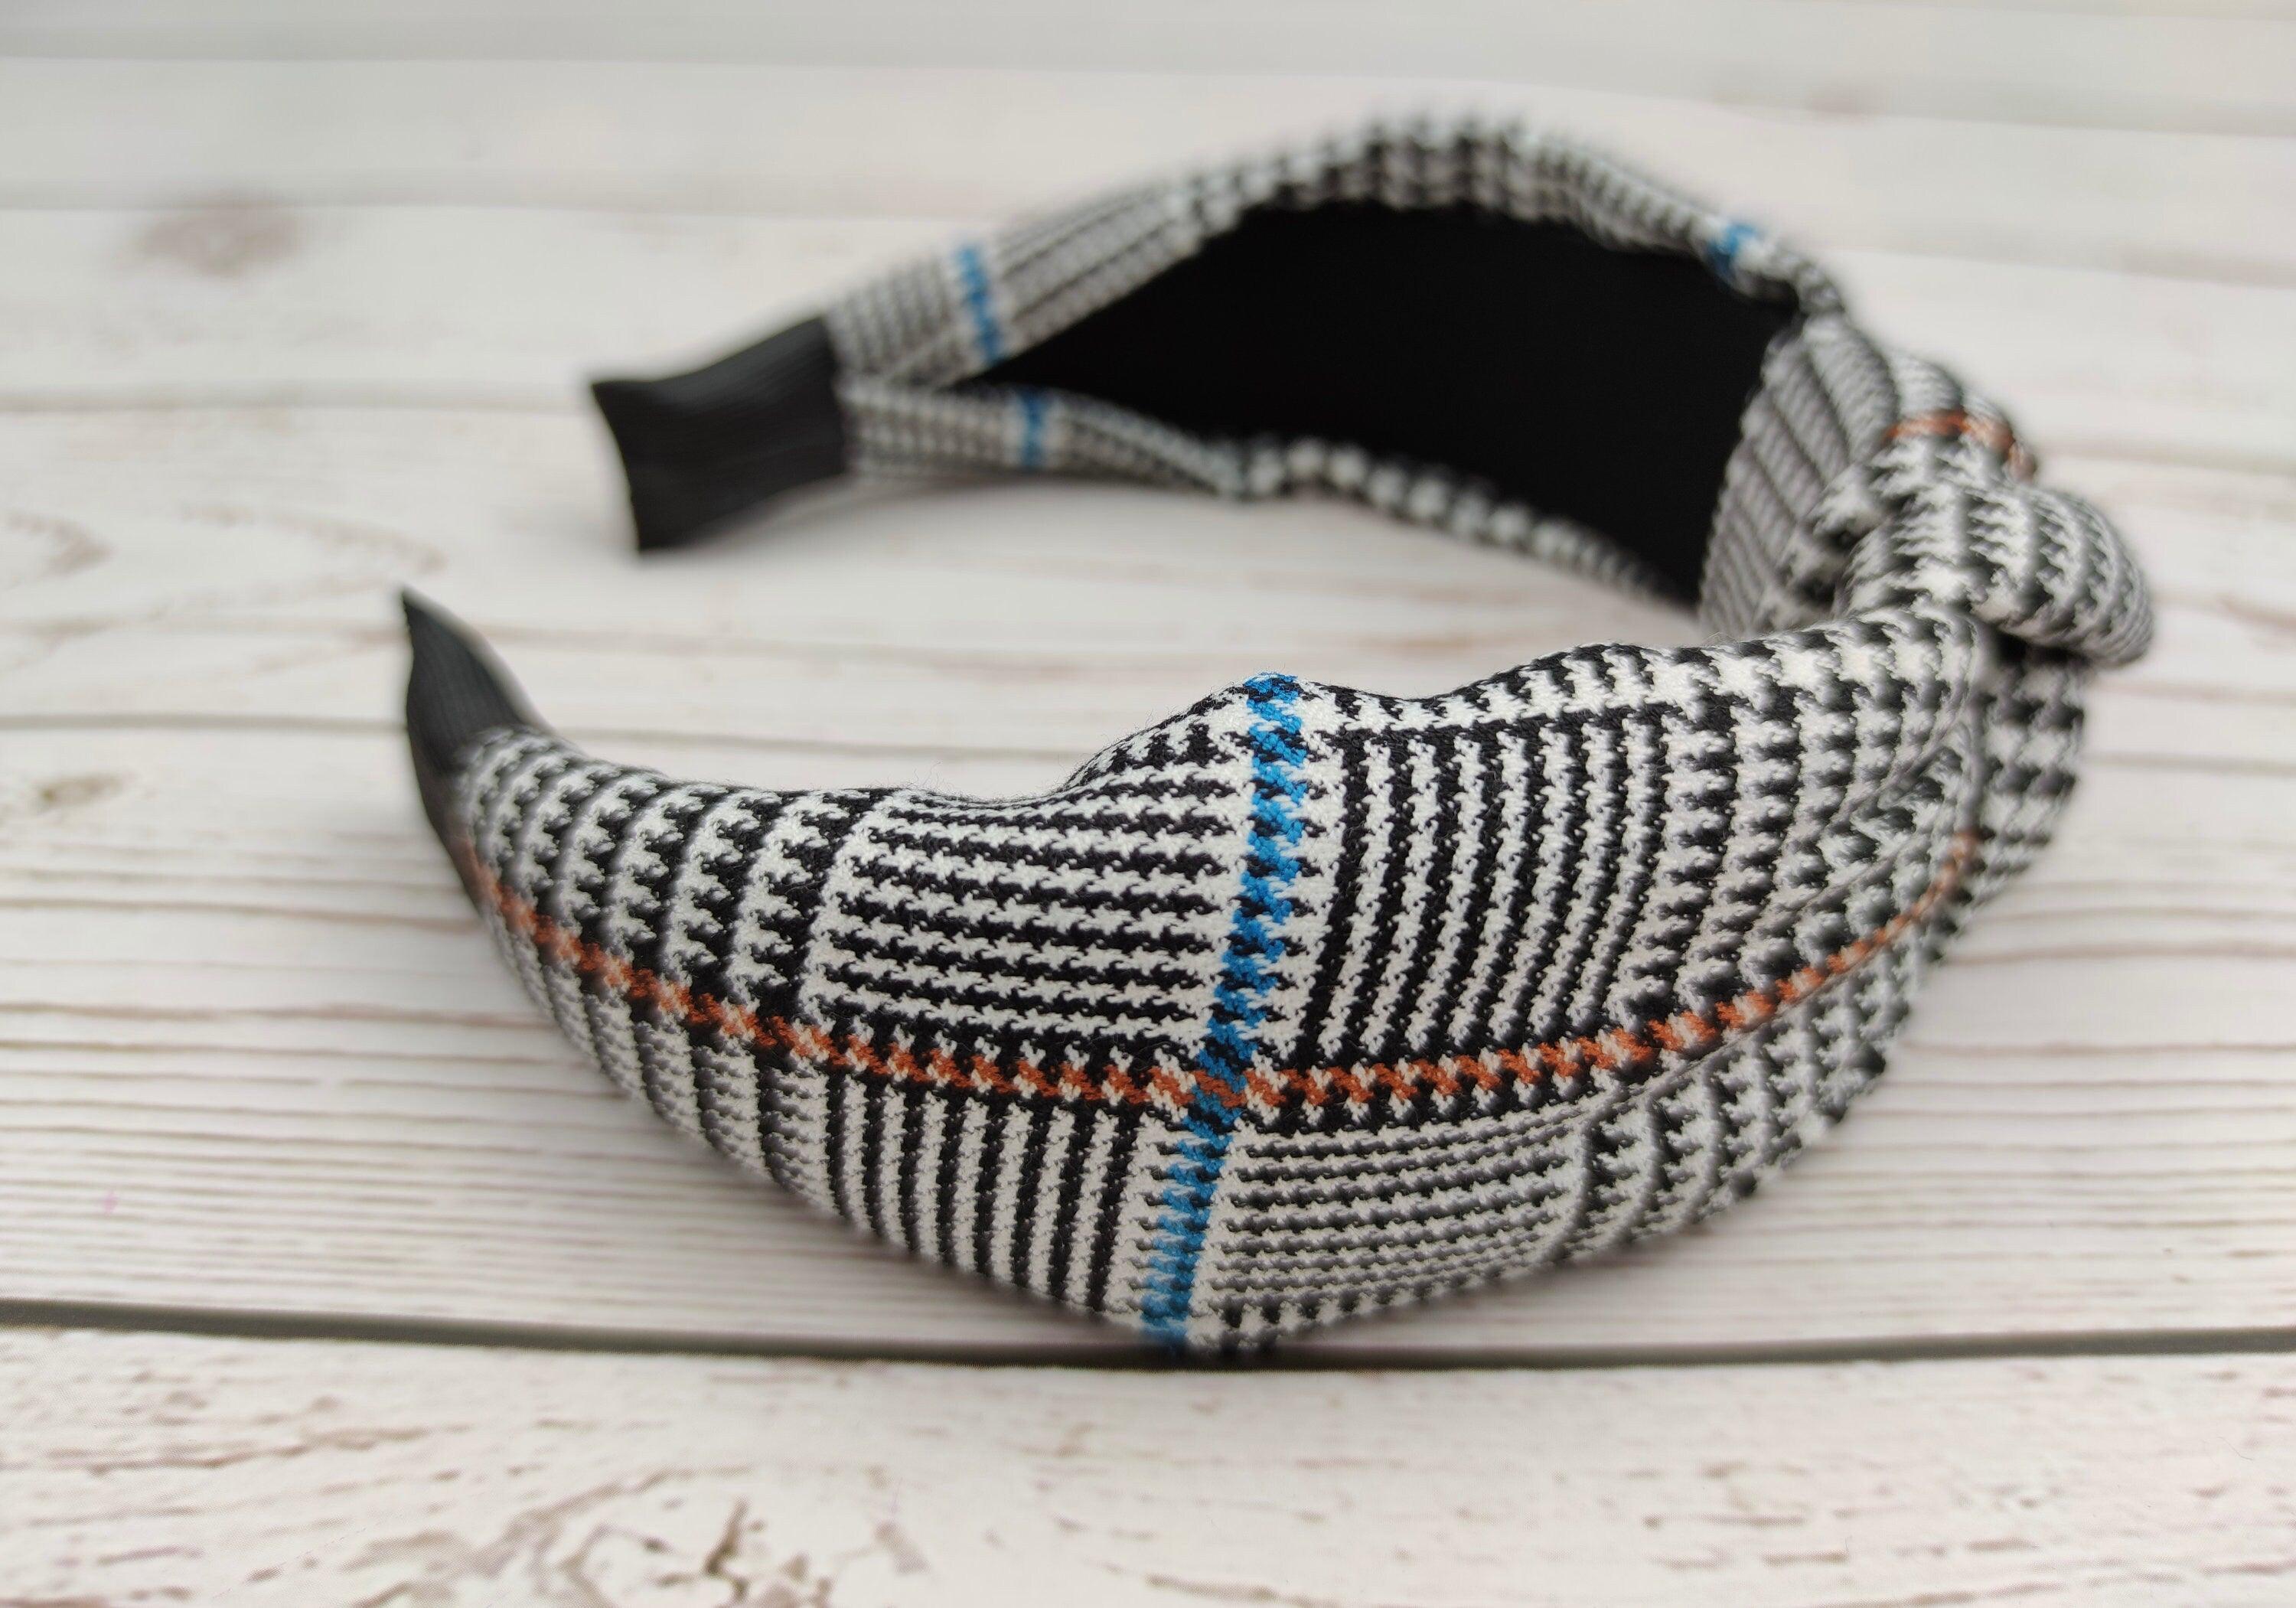 Unique Classic Knotted Crepe Headband in White and Black, Perfect for College Fashion and Everyday Wear - Featuring Blue and Orange Stripes available at Moyoni Design